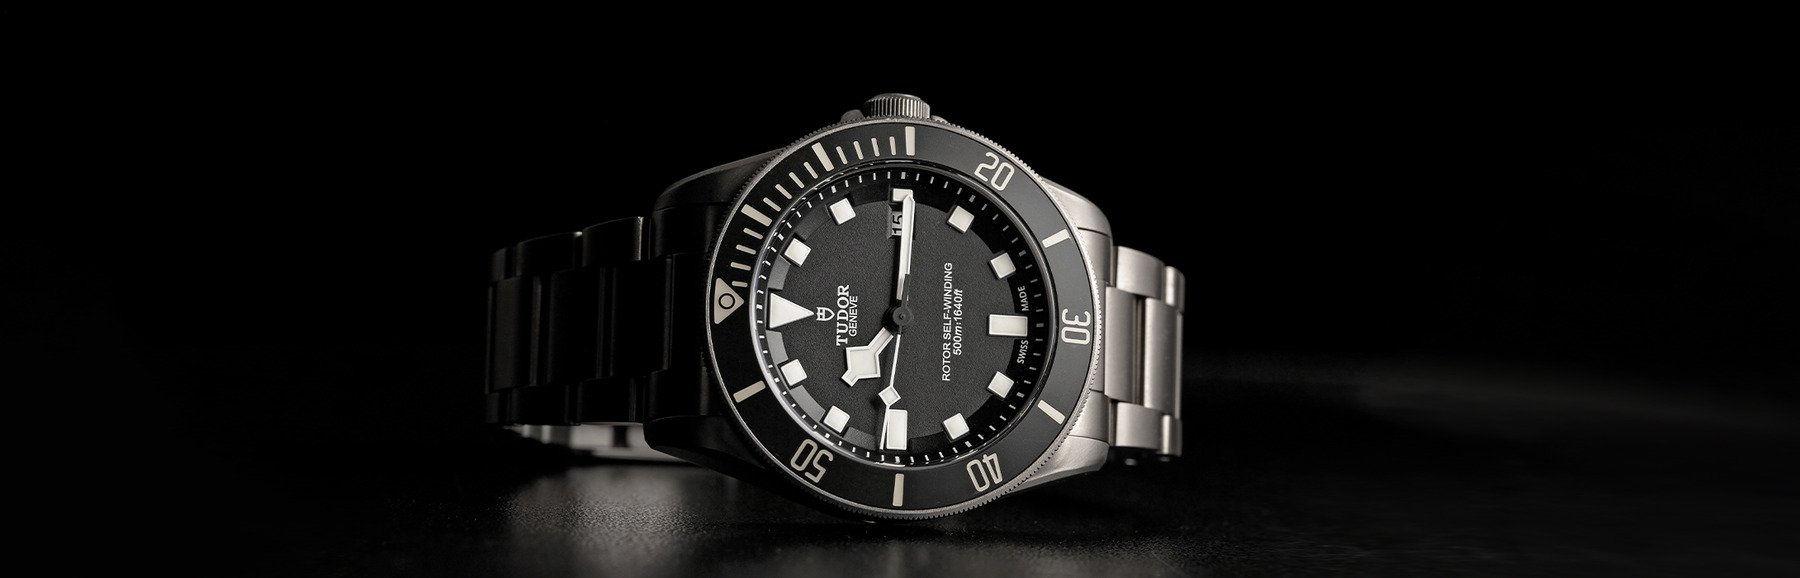 Rolex vs. Other Luxury Watch Brands: What Sets Them Apart - 86126